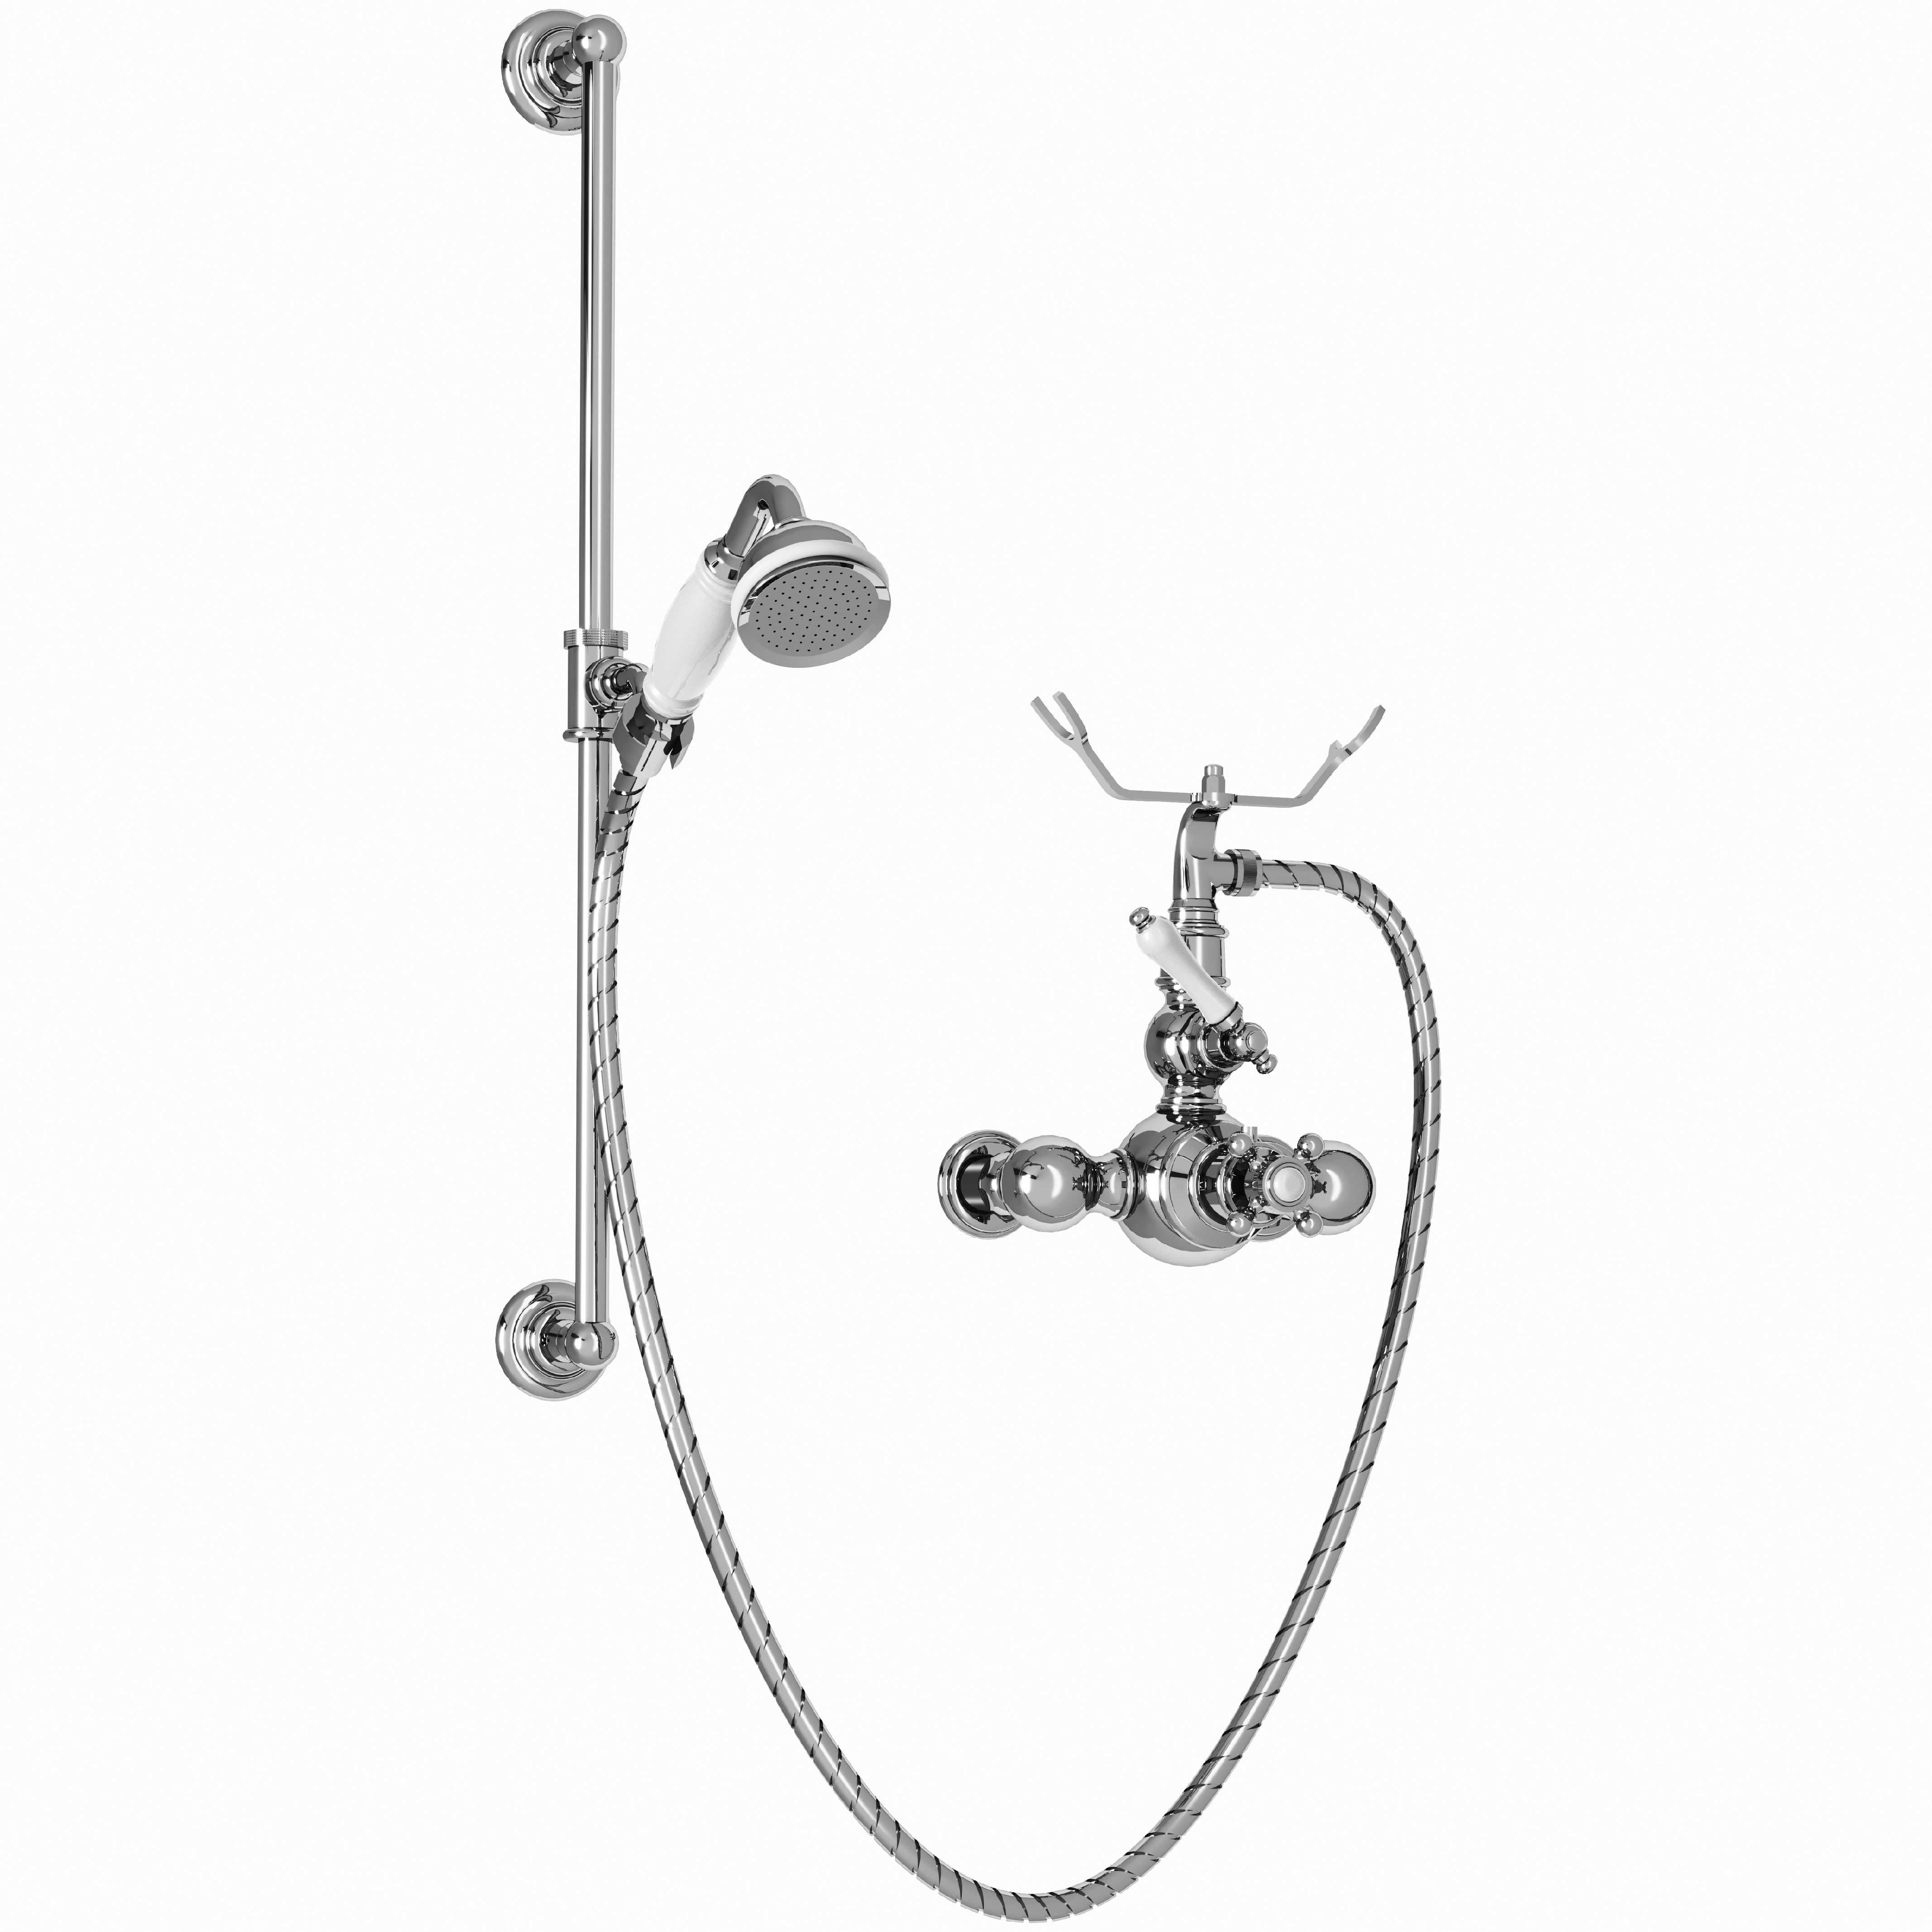 M04-2202T Mitigeur thermo. douche, coulidouche